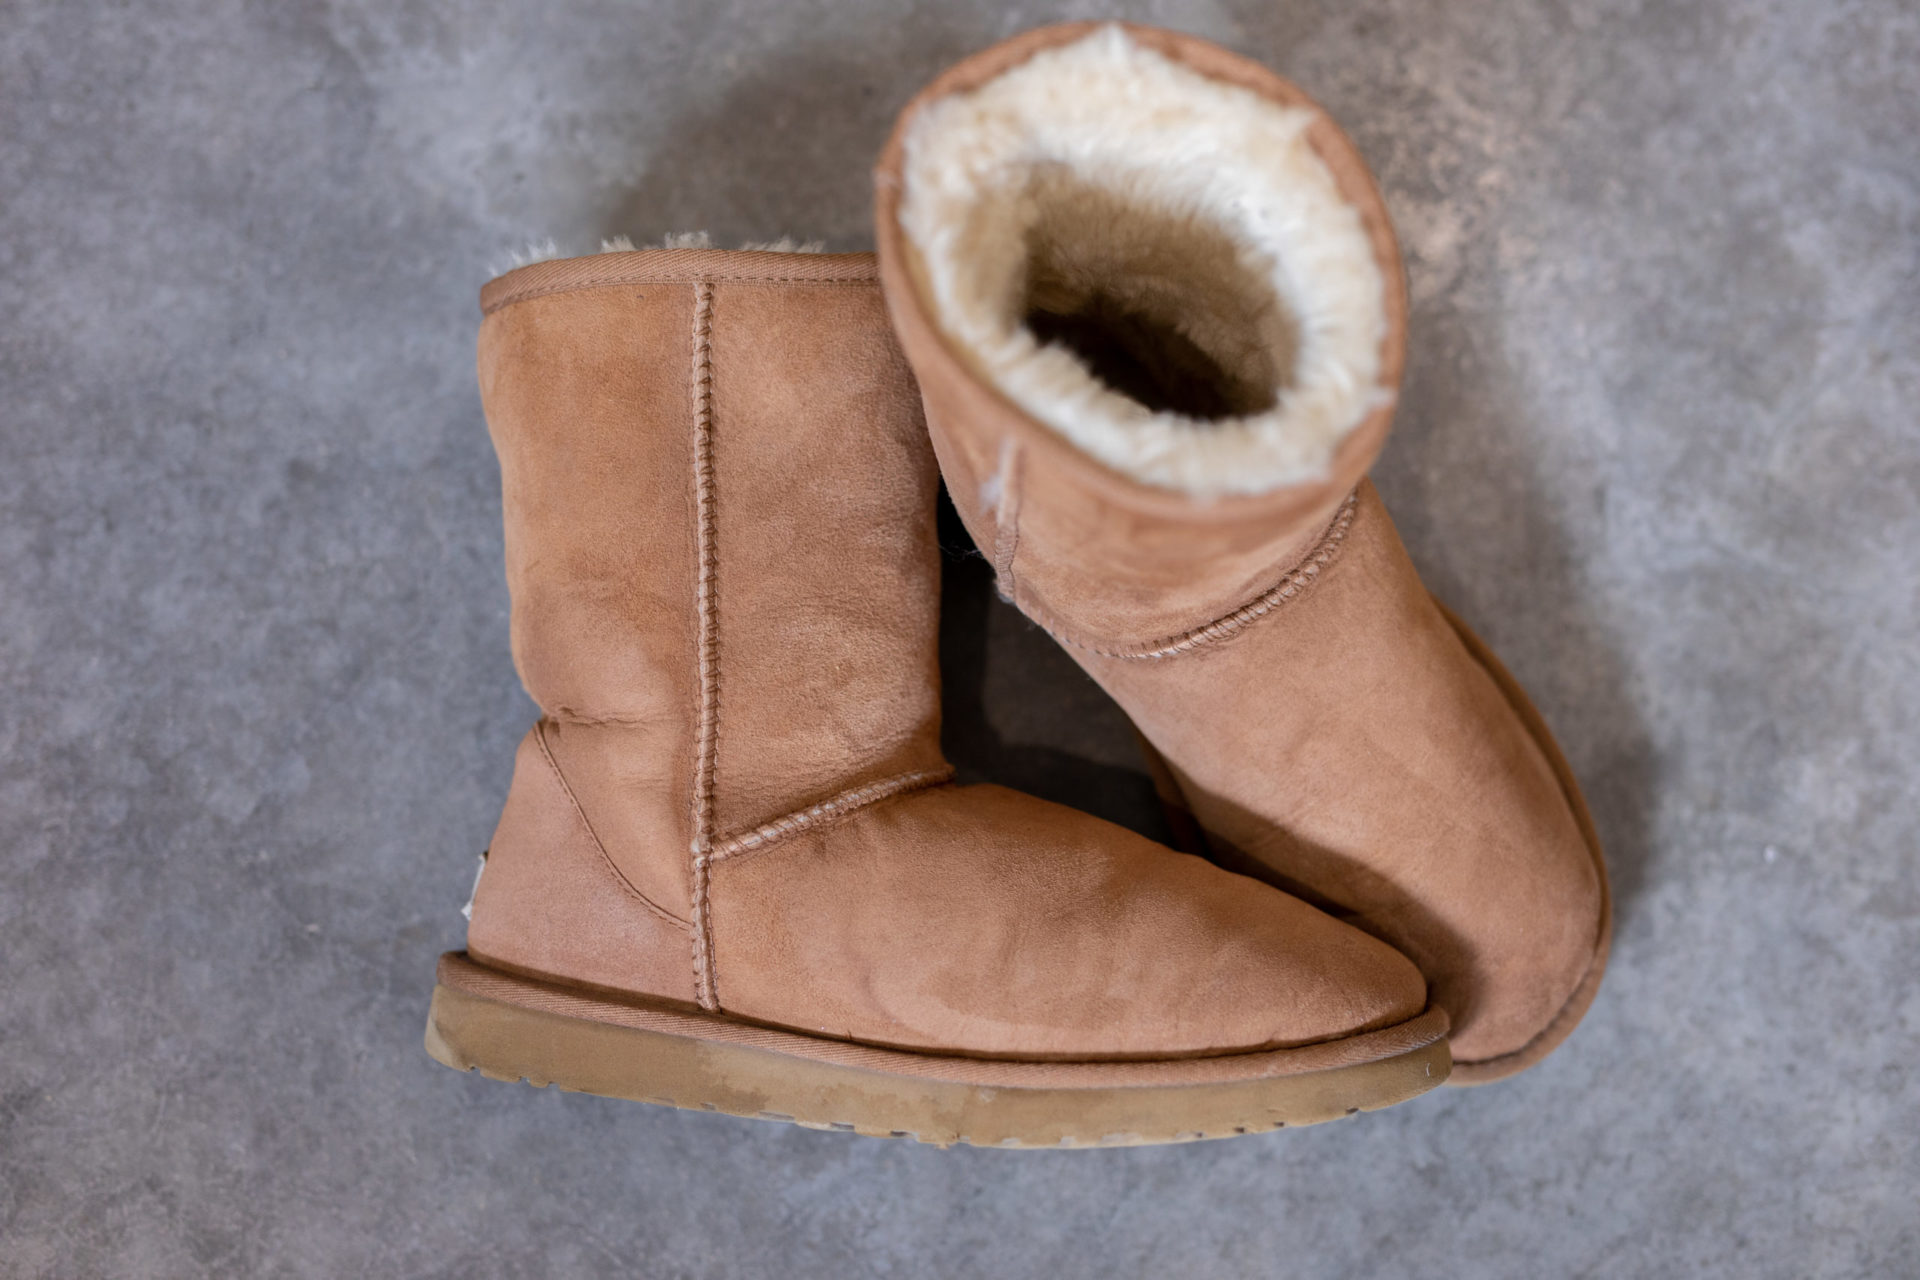 How To Clean Your Uggs [23 Methods Tested] - Living in Yellow